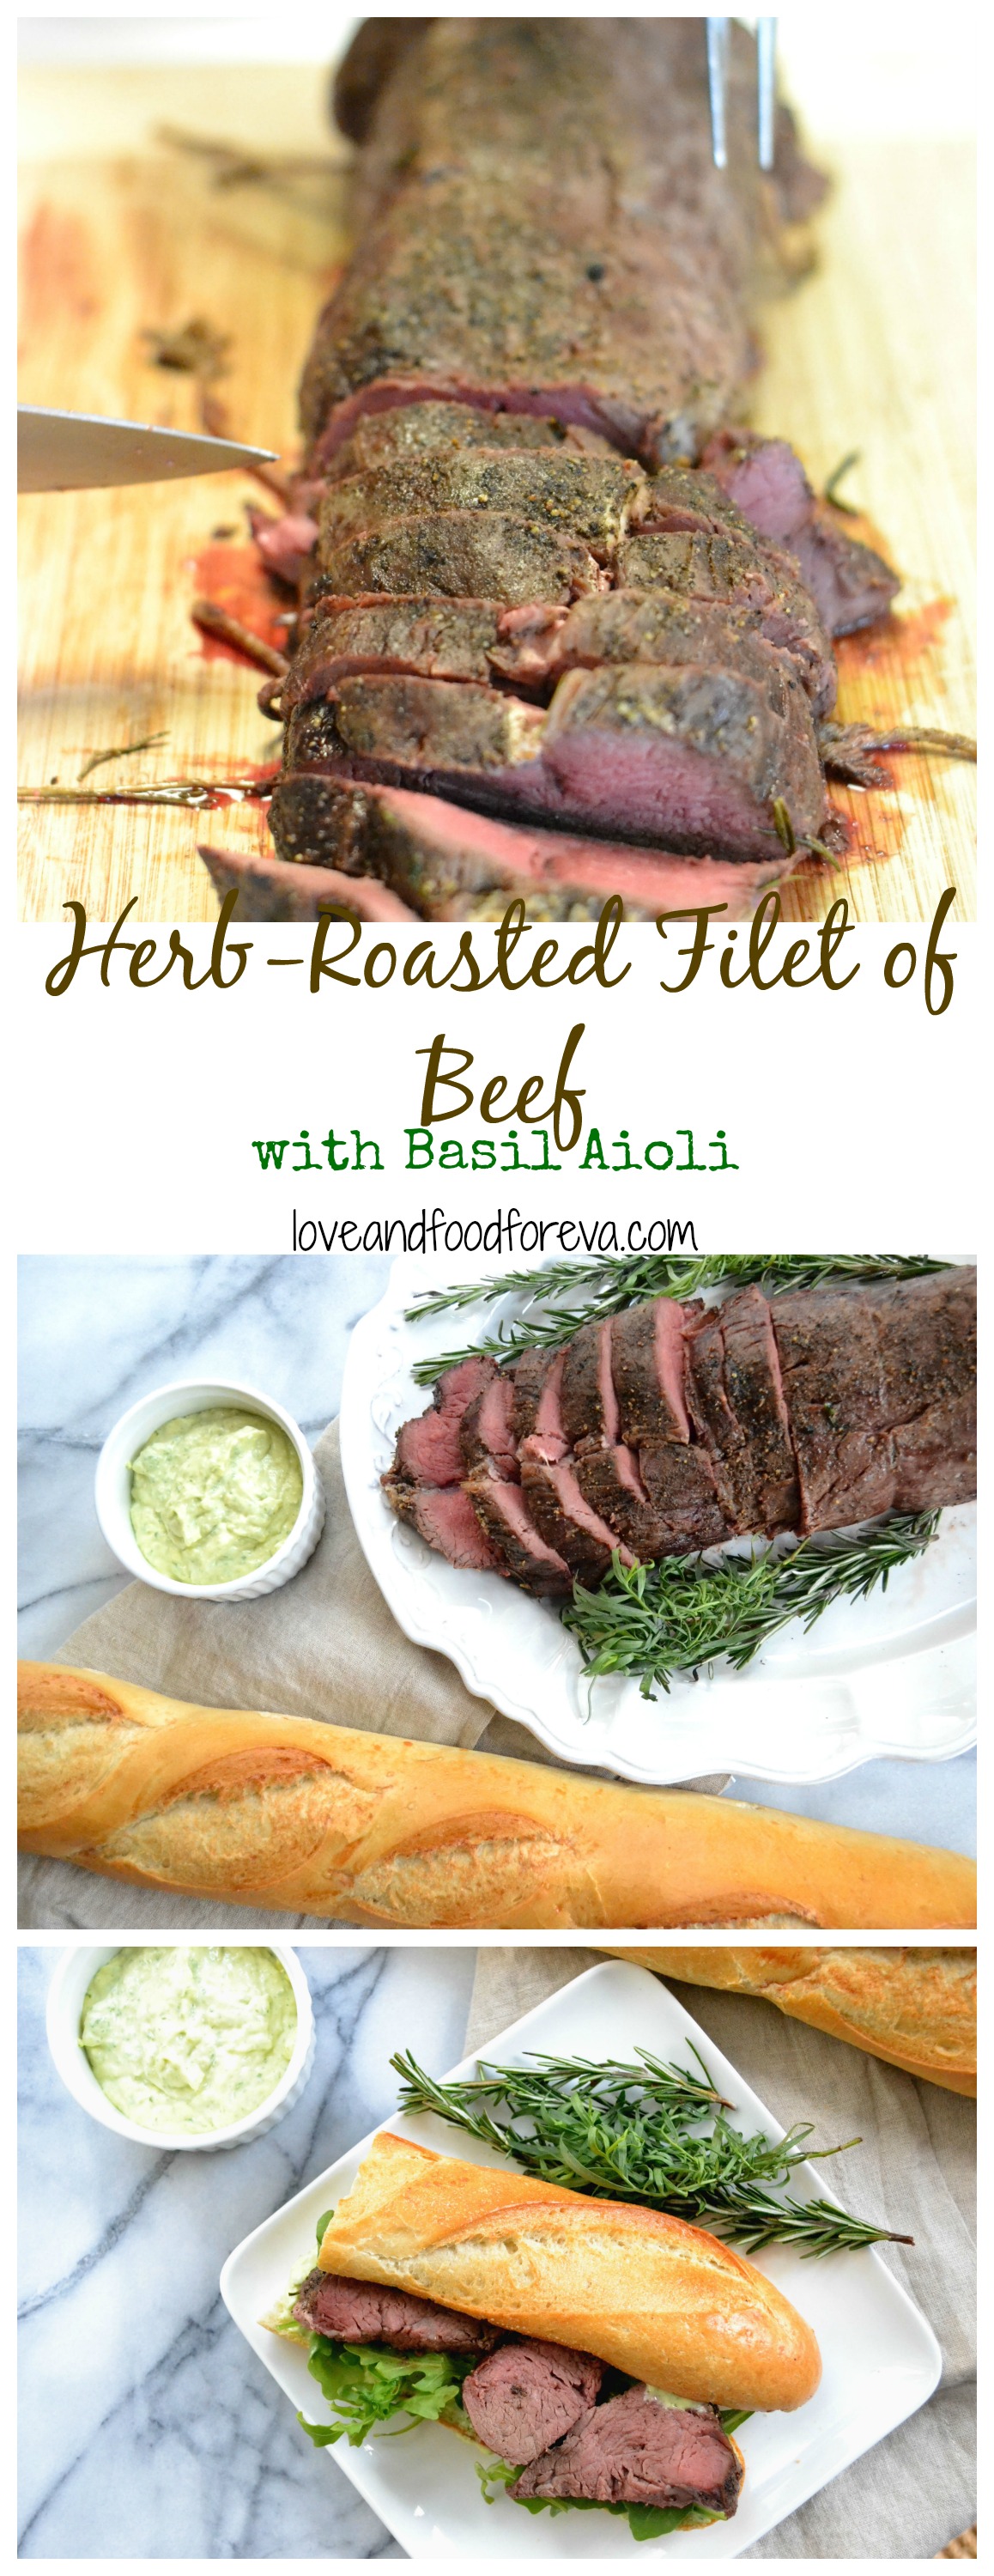 Herb Roasted Filet of Beef with Basil Aioli - an easy yet impressive dish for dinner parties!